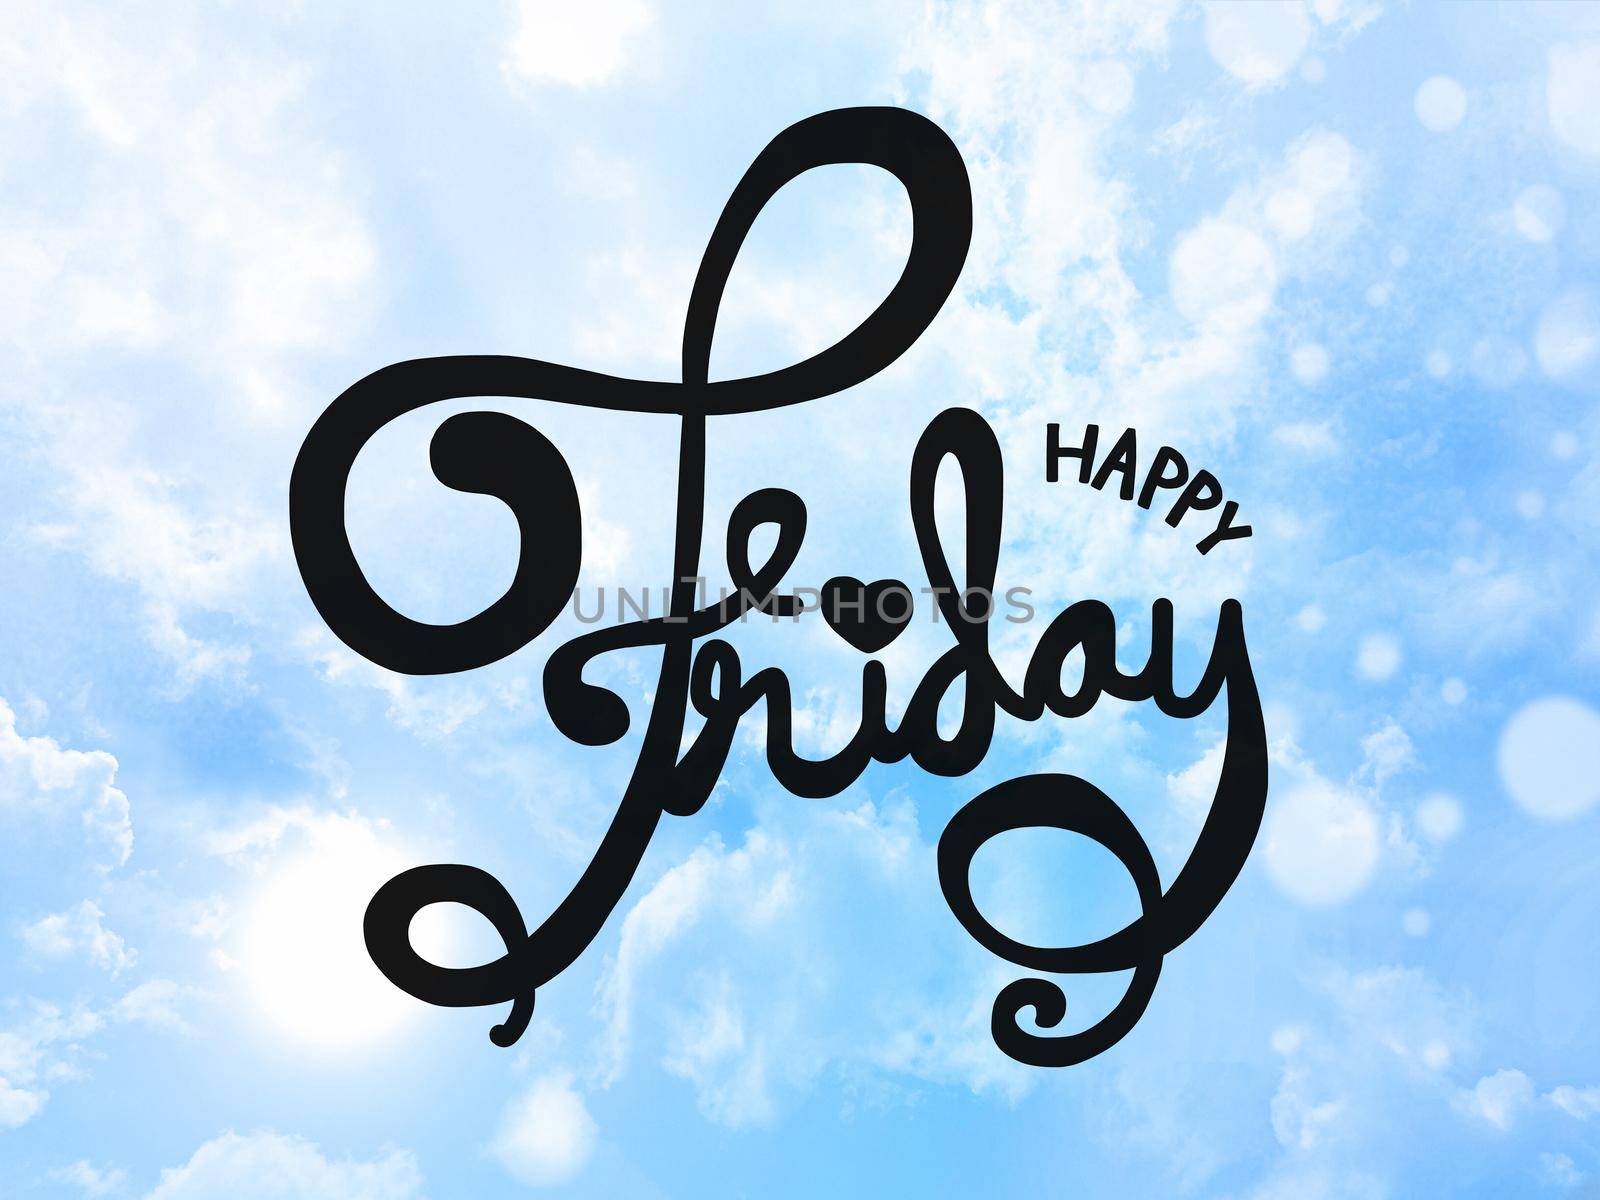 Happy Friday word lettering on blue sky bokeh effect by Yoopho